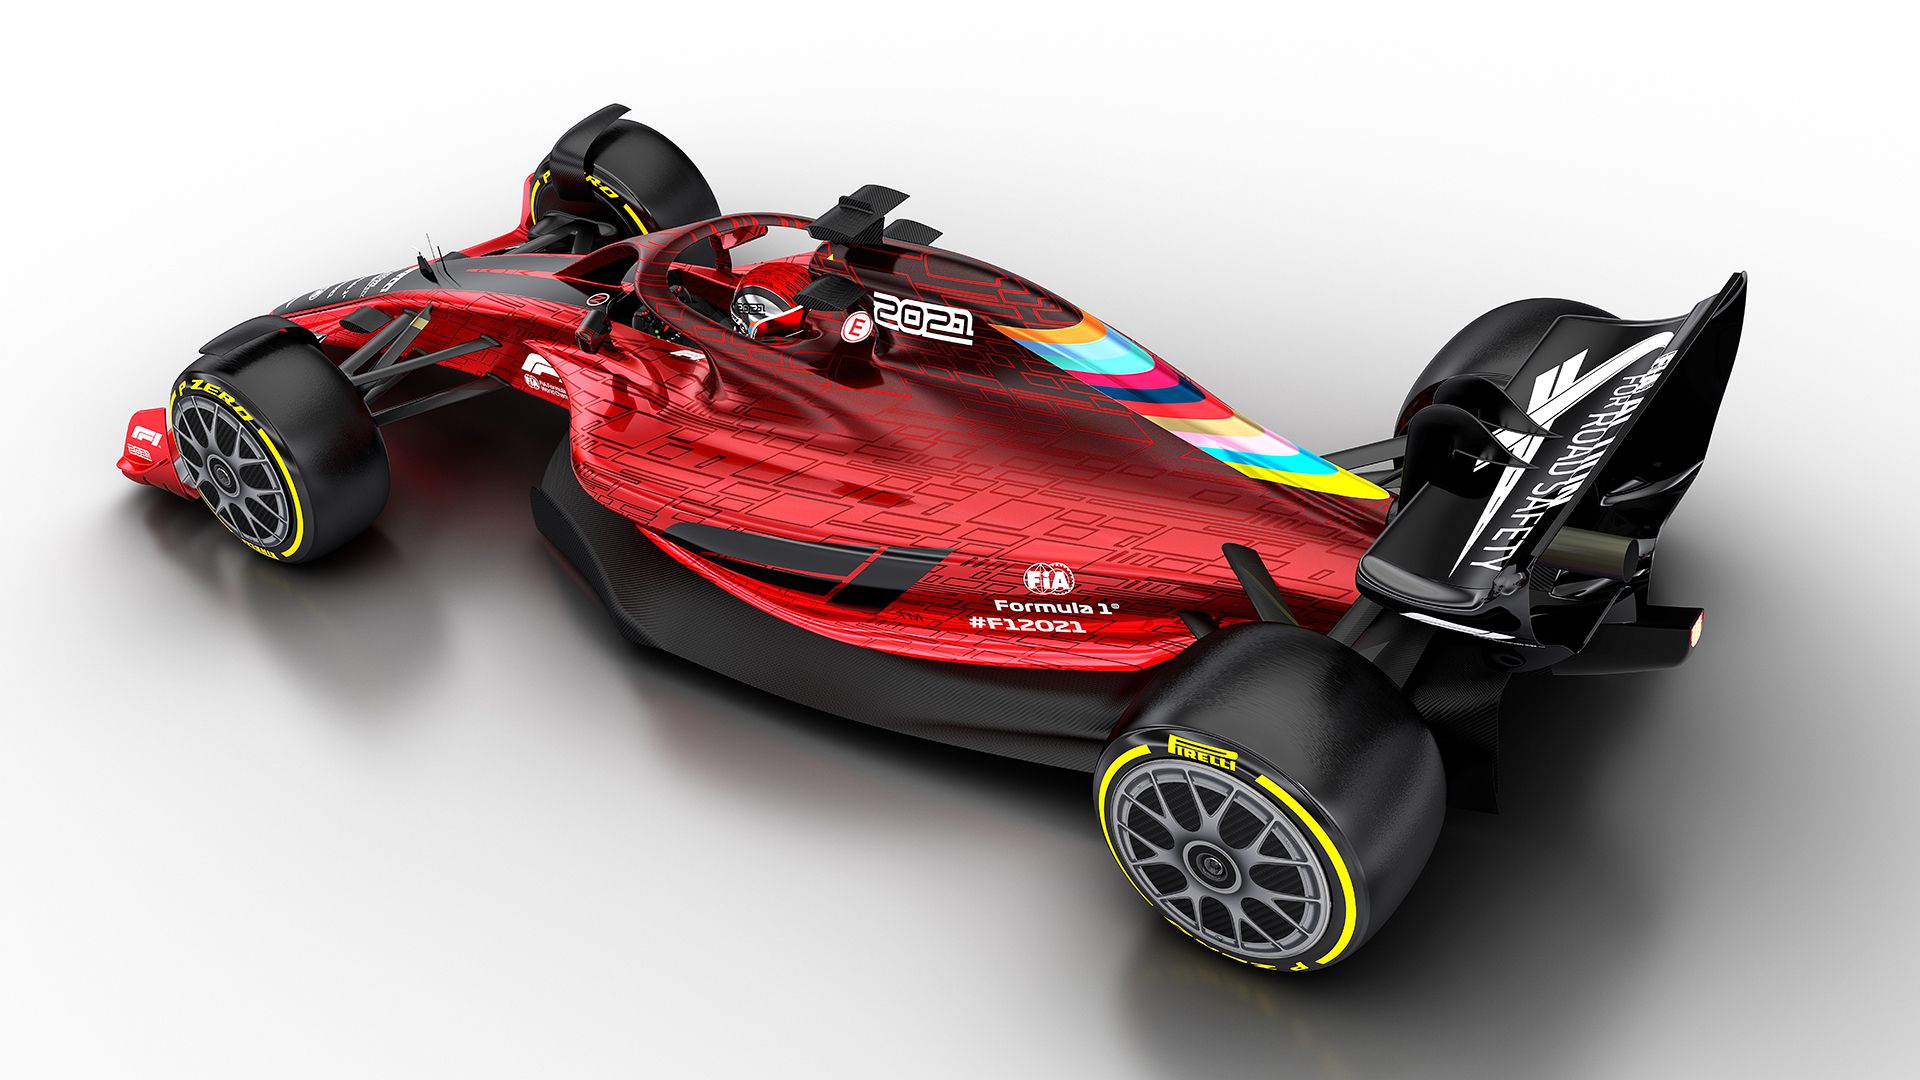 F1 rules: Gallery of image of the 2021 F1 car. Formula 1®